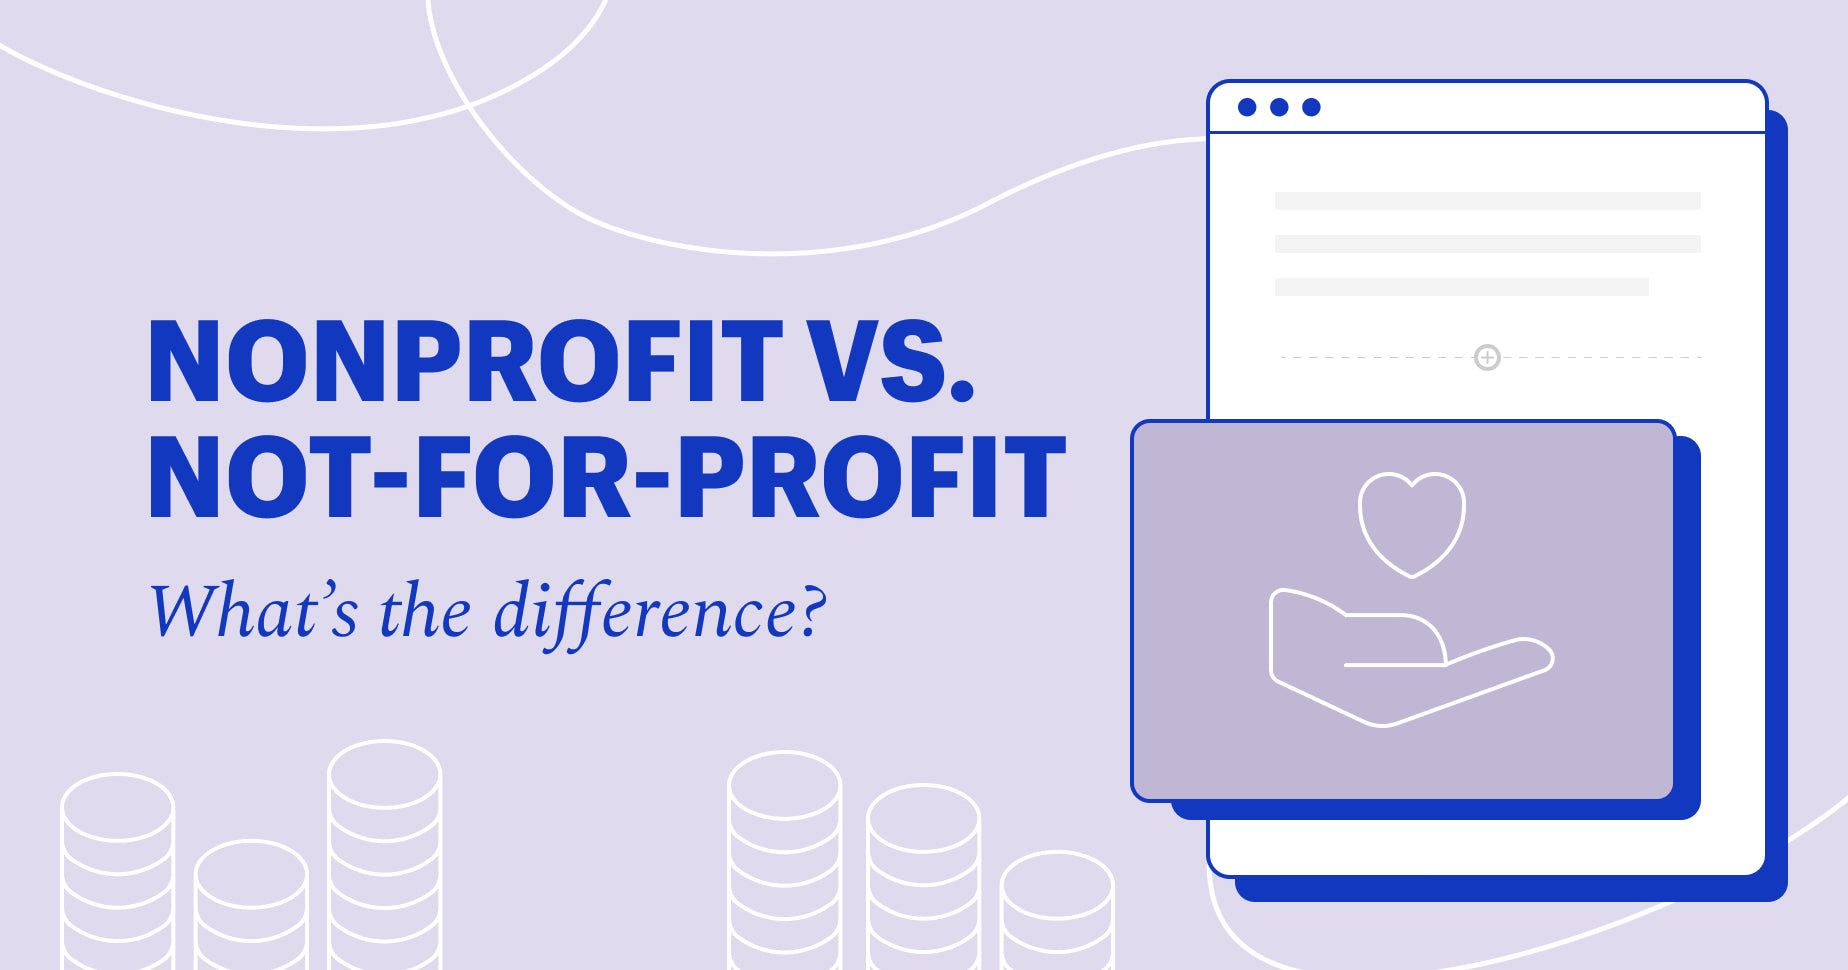 Nonprofit vs. Not-for-Profit: What's the Difference? - Shopify